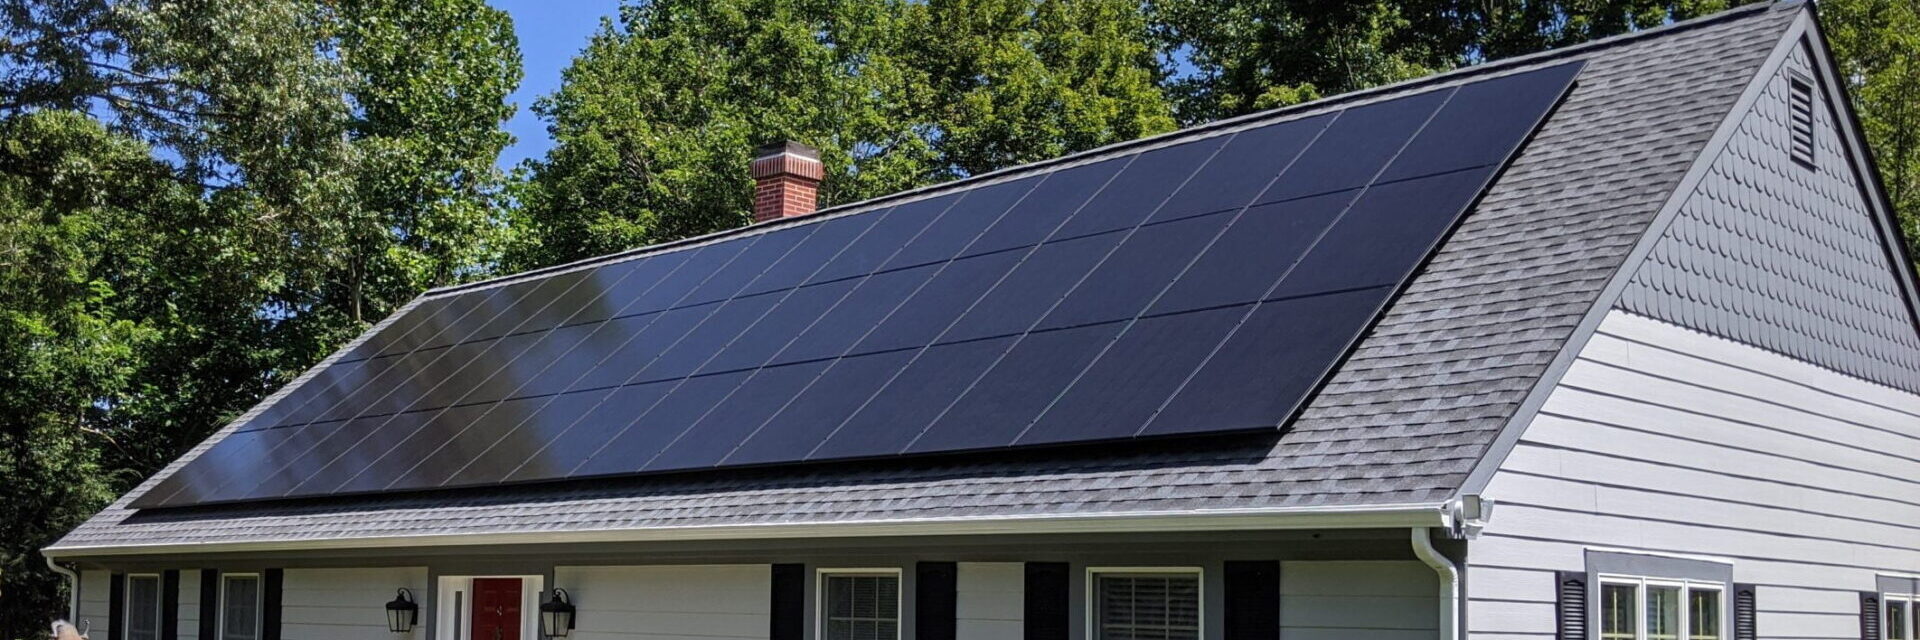 rooftop solar panels professionally installed on white house in Virginia